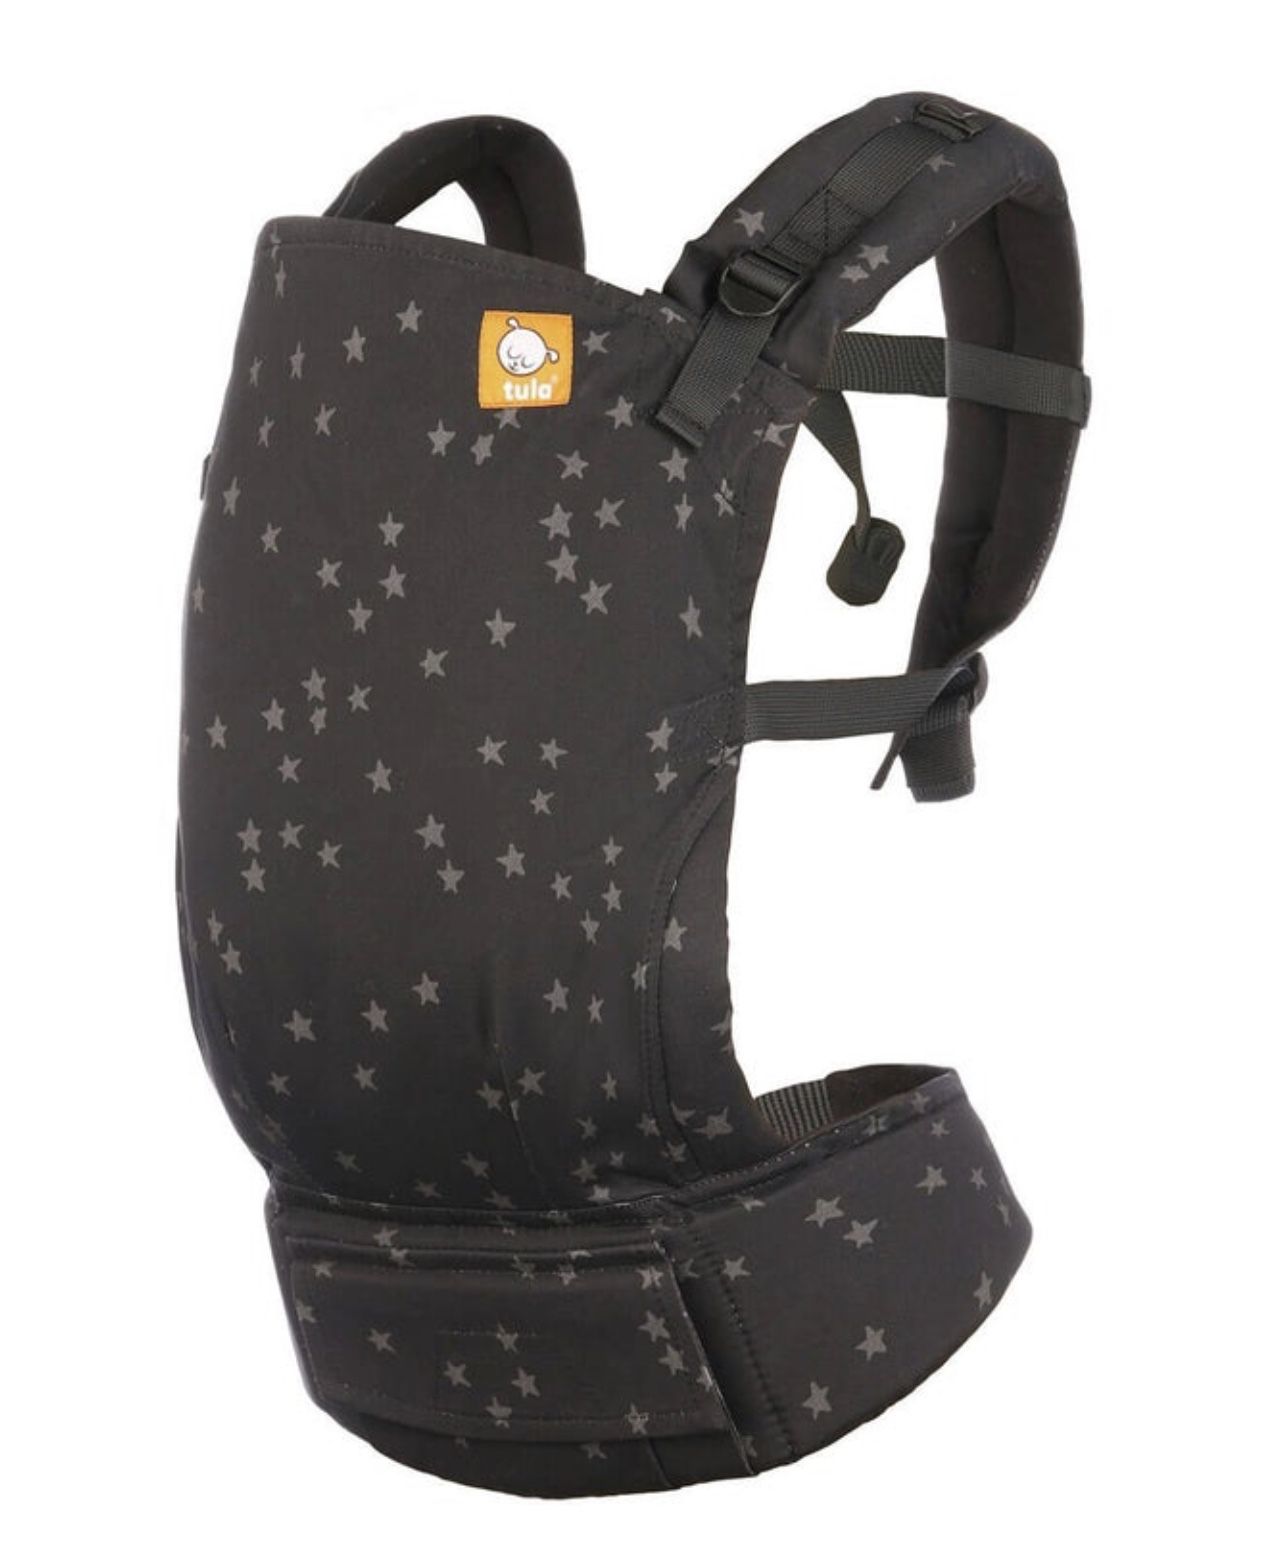 Tula Baby Carrier Discover